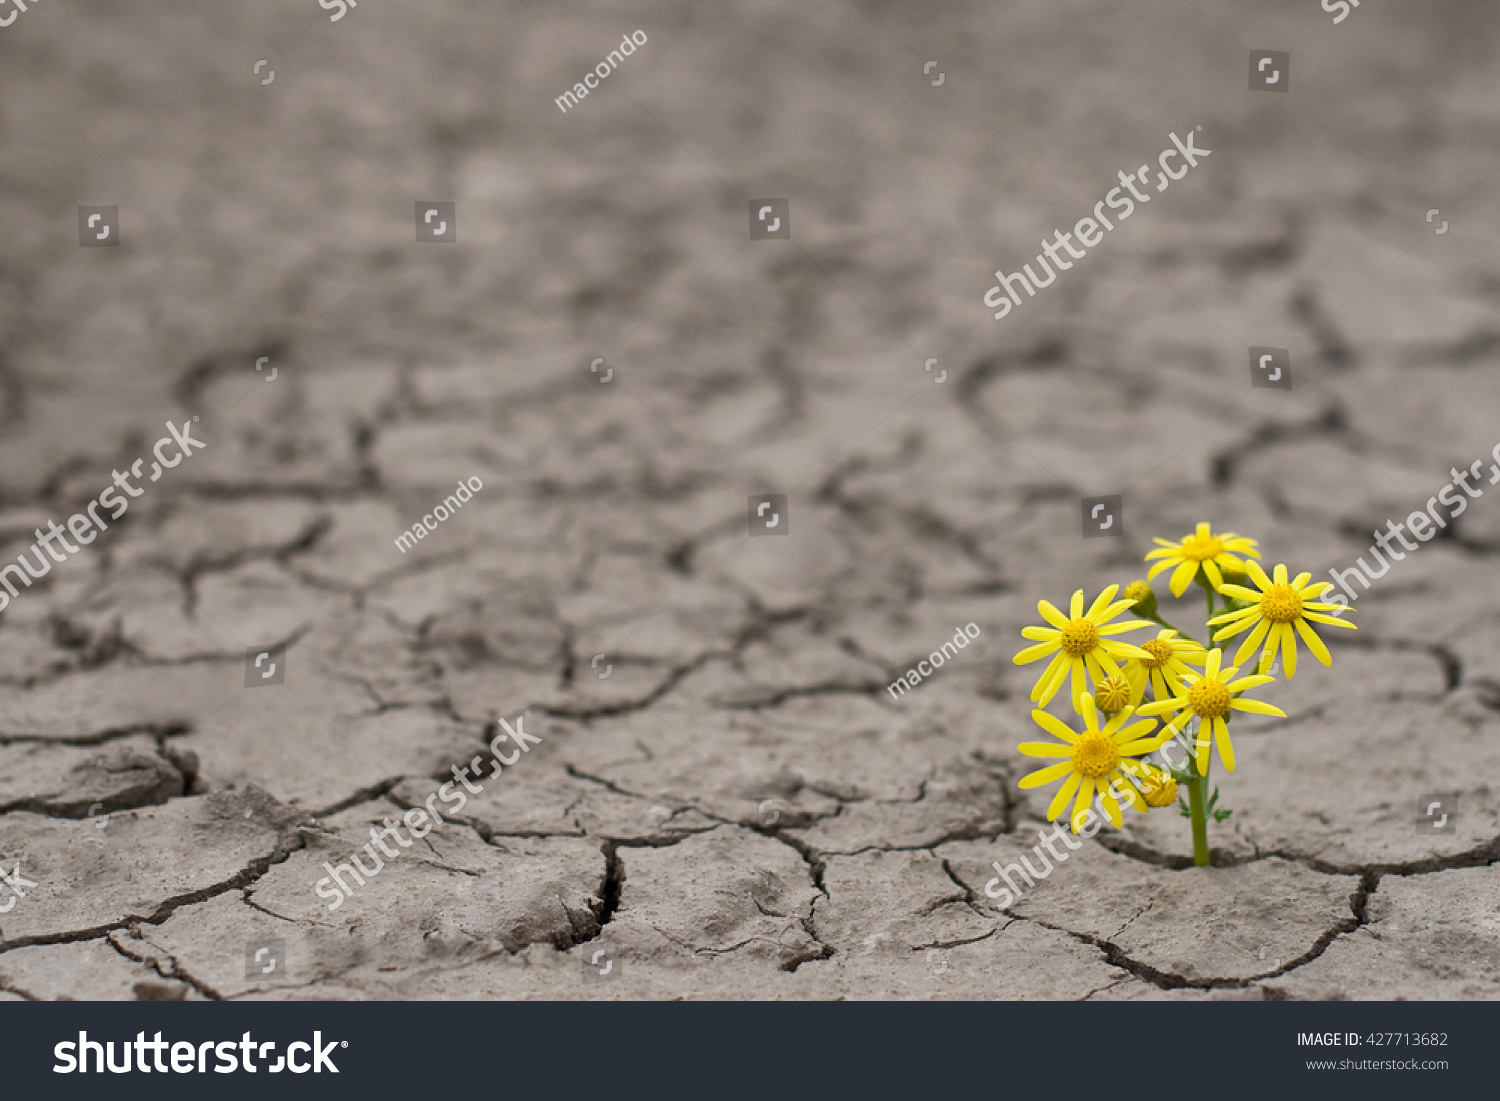 Horizontal side view of a lonely yellow flower growing on dried cracked soil #427713682